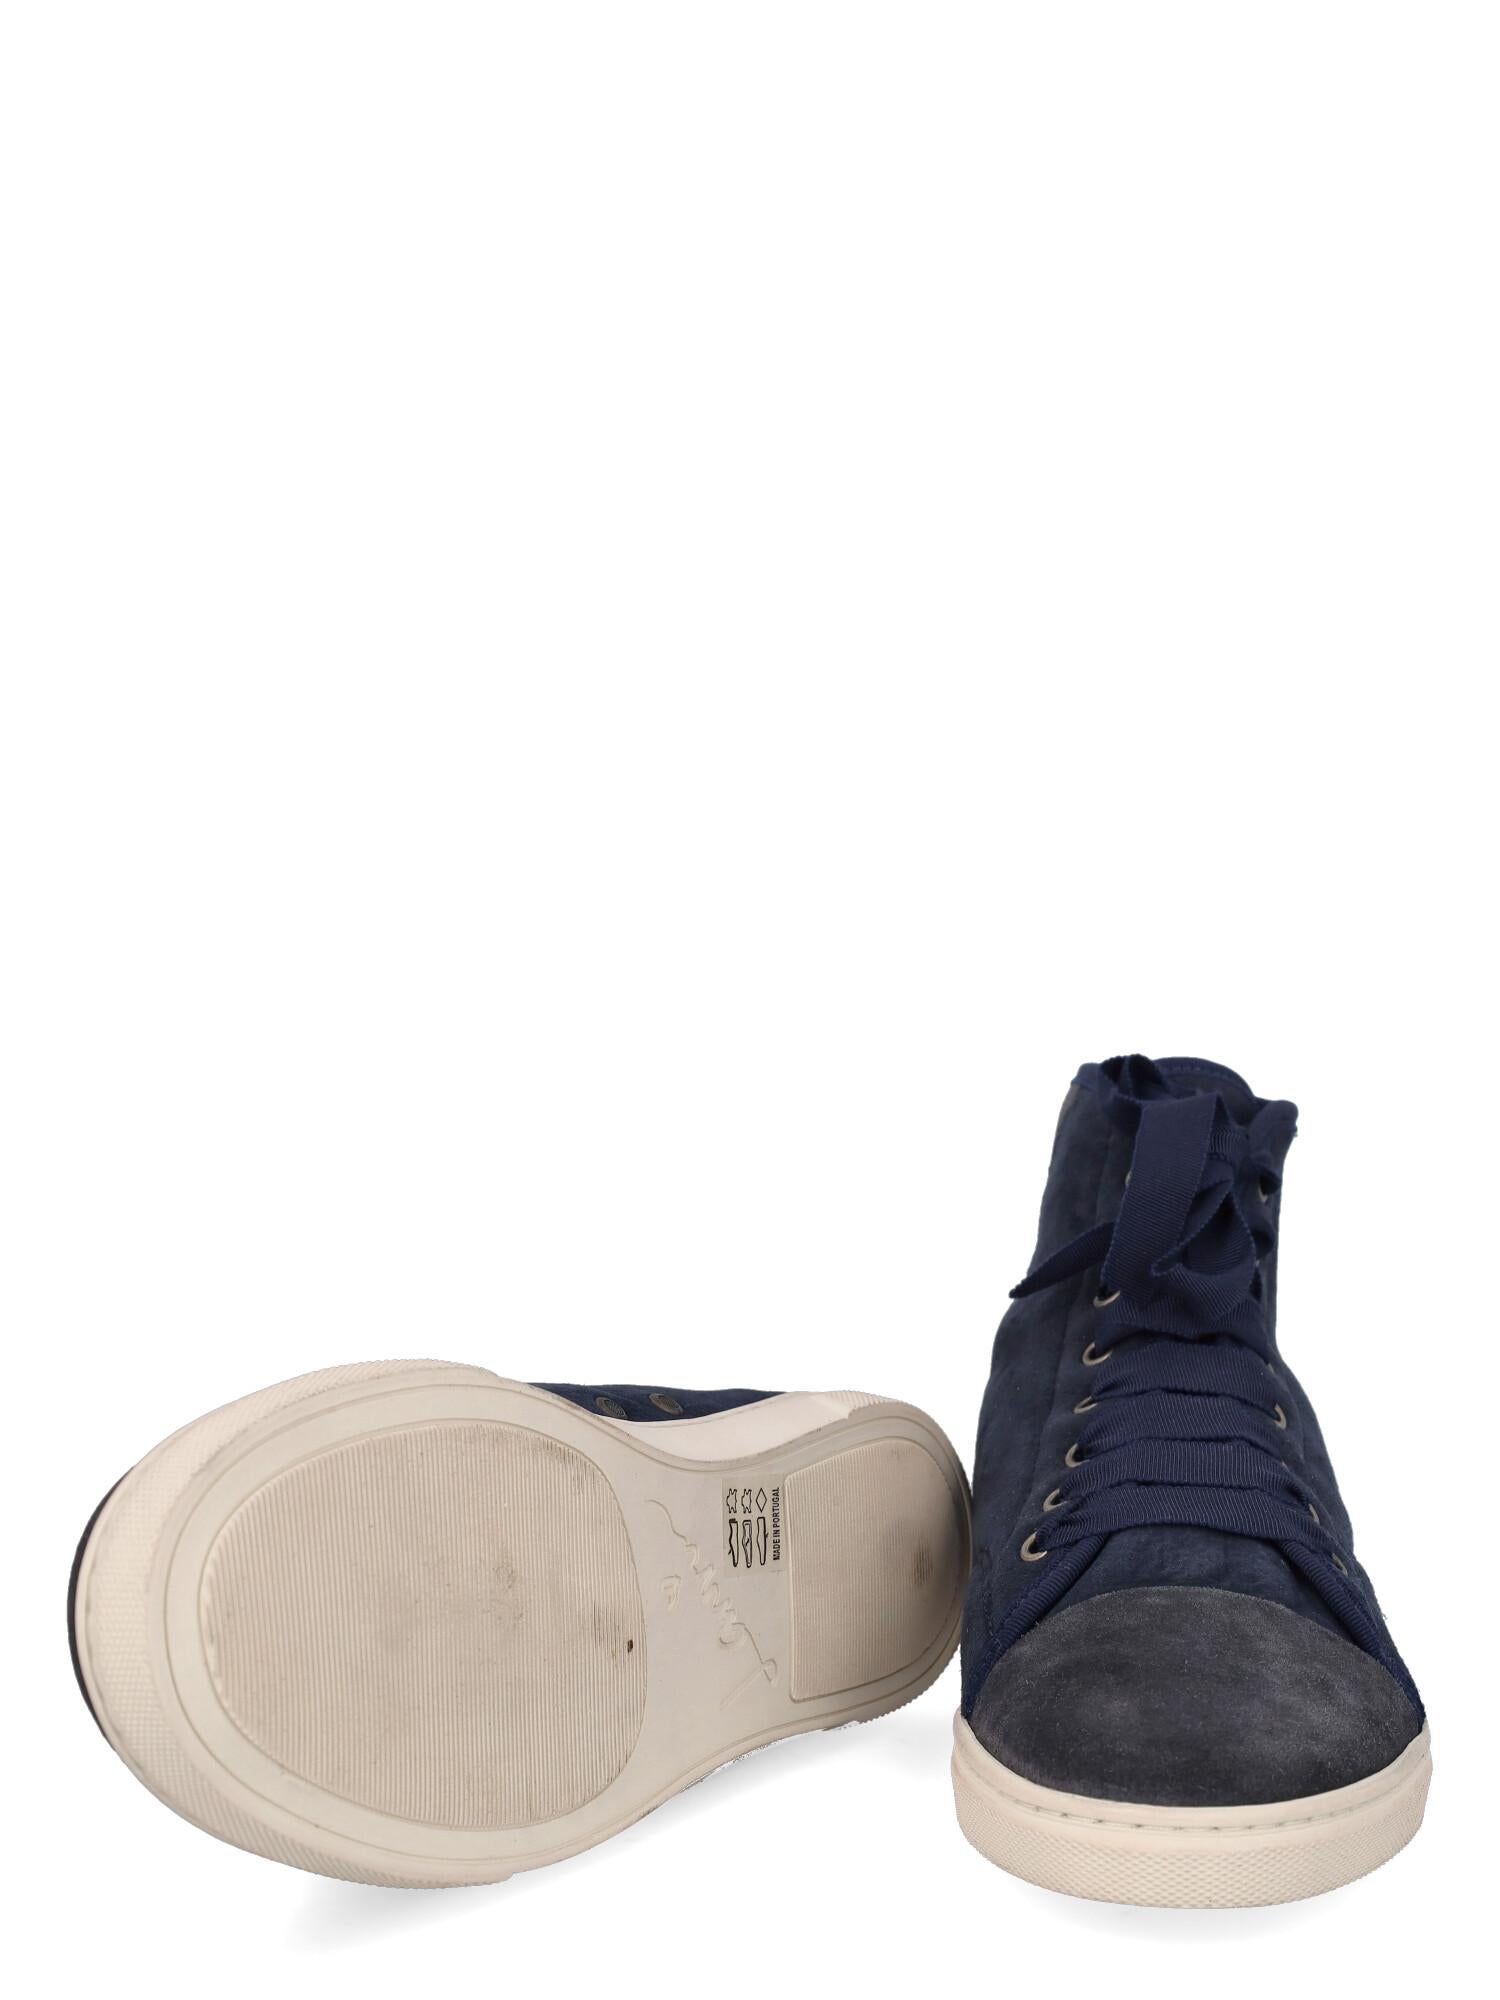 Lanvin Women Sneakers Navy Leather EU 39 In Good Condition For Sale In Milan, IT